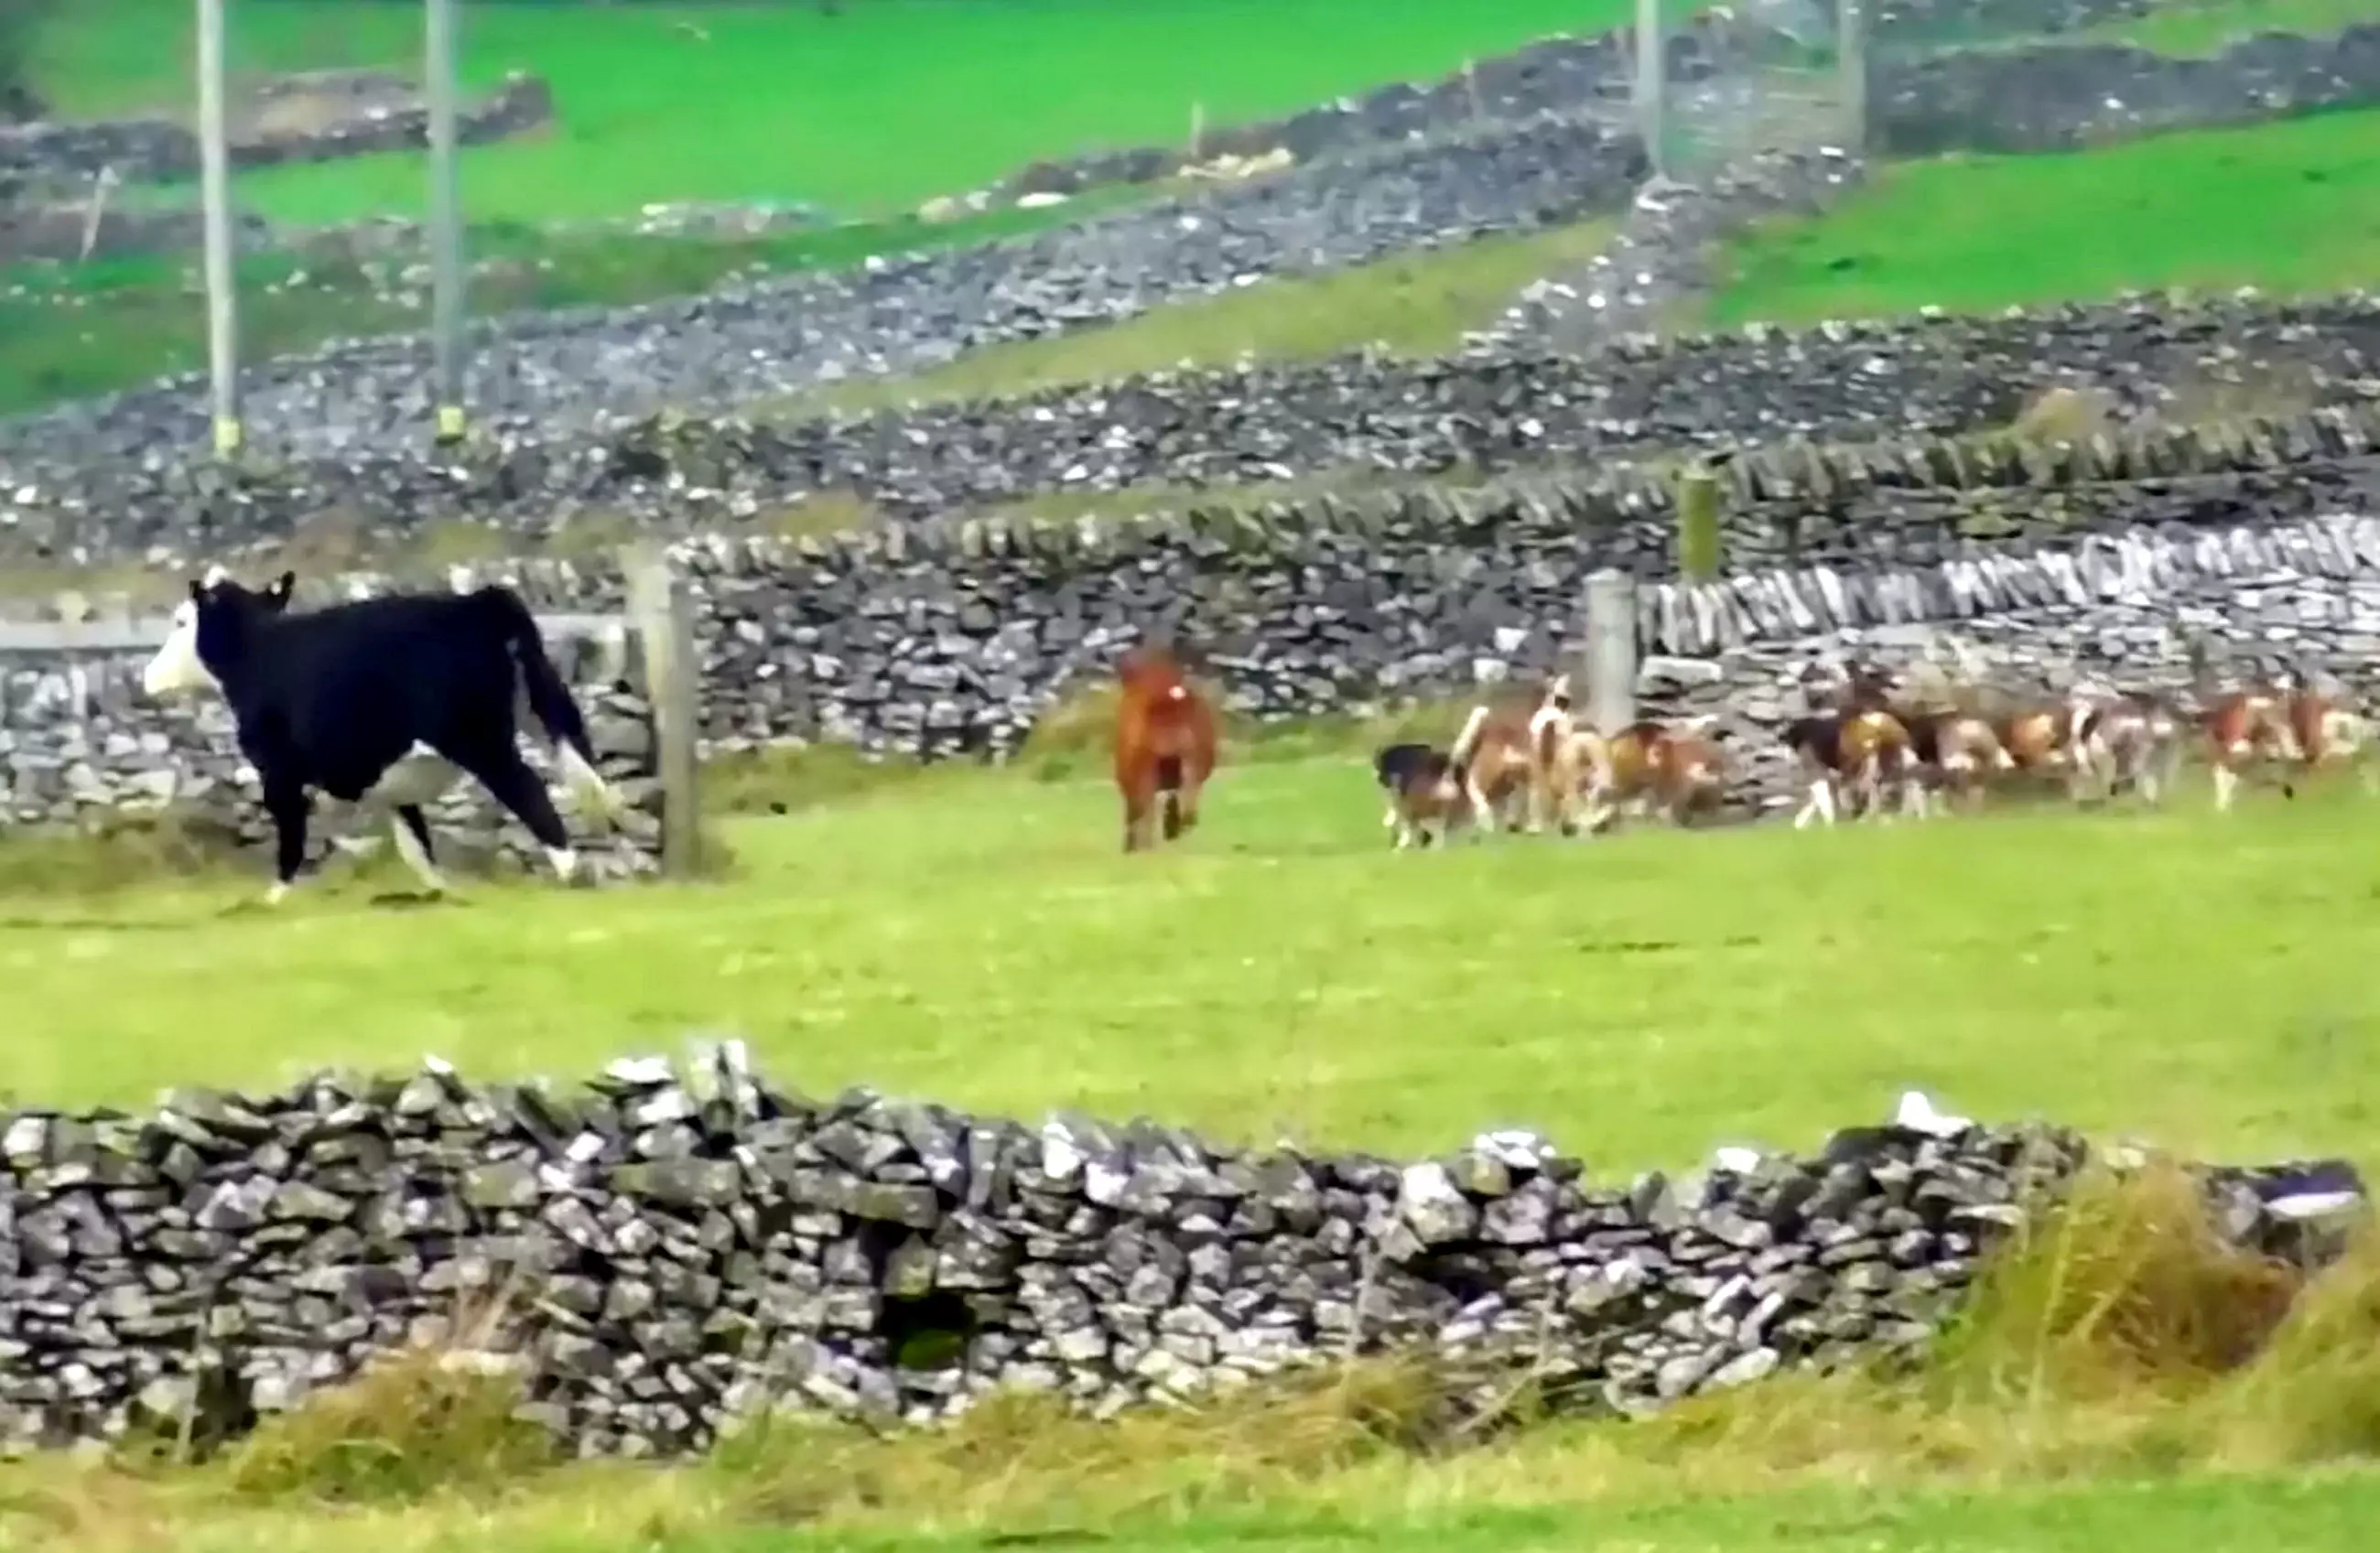 The calf's mother escaped the chase (